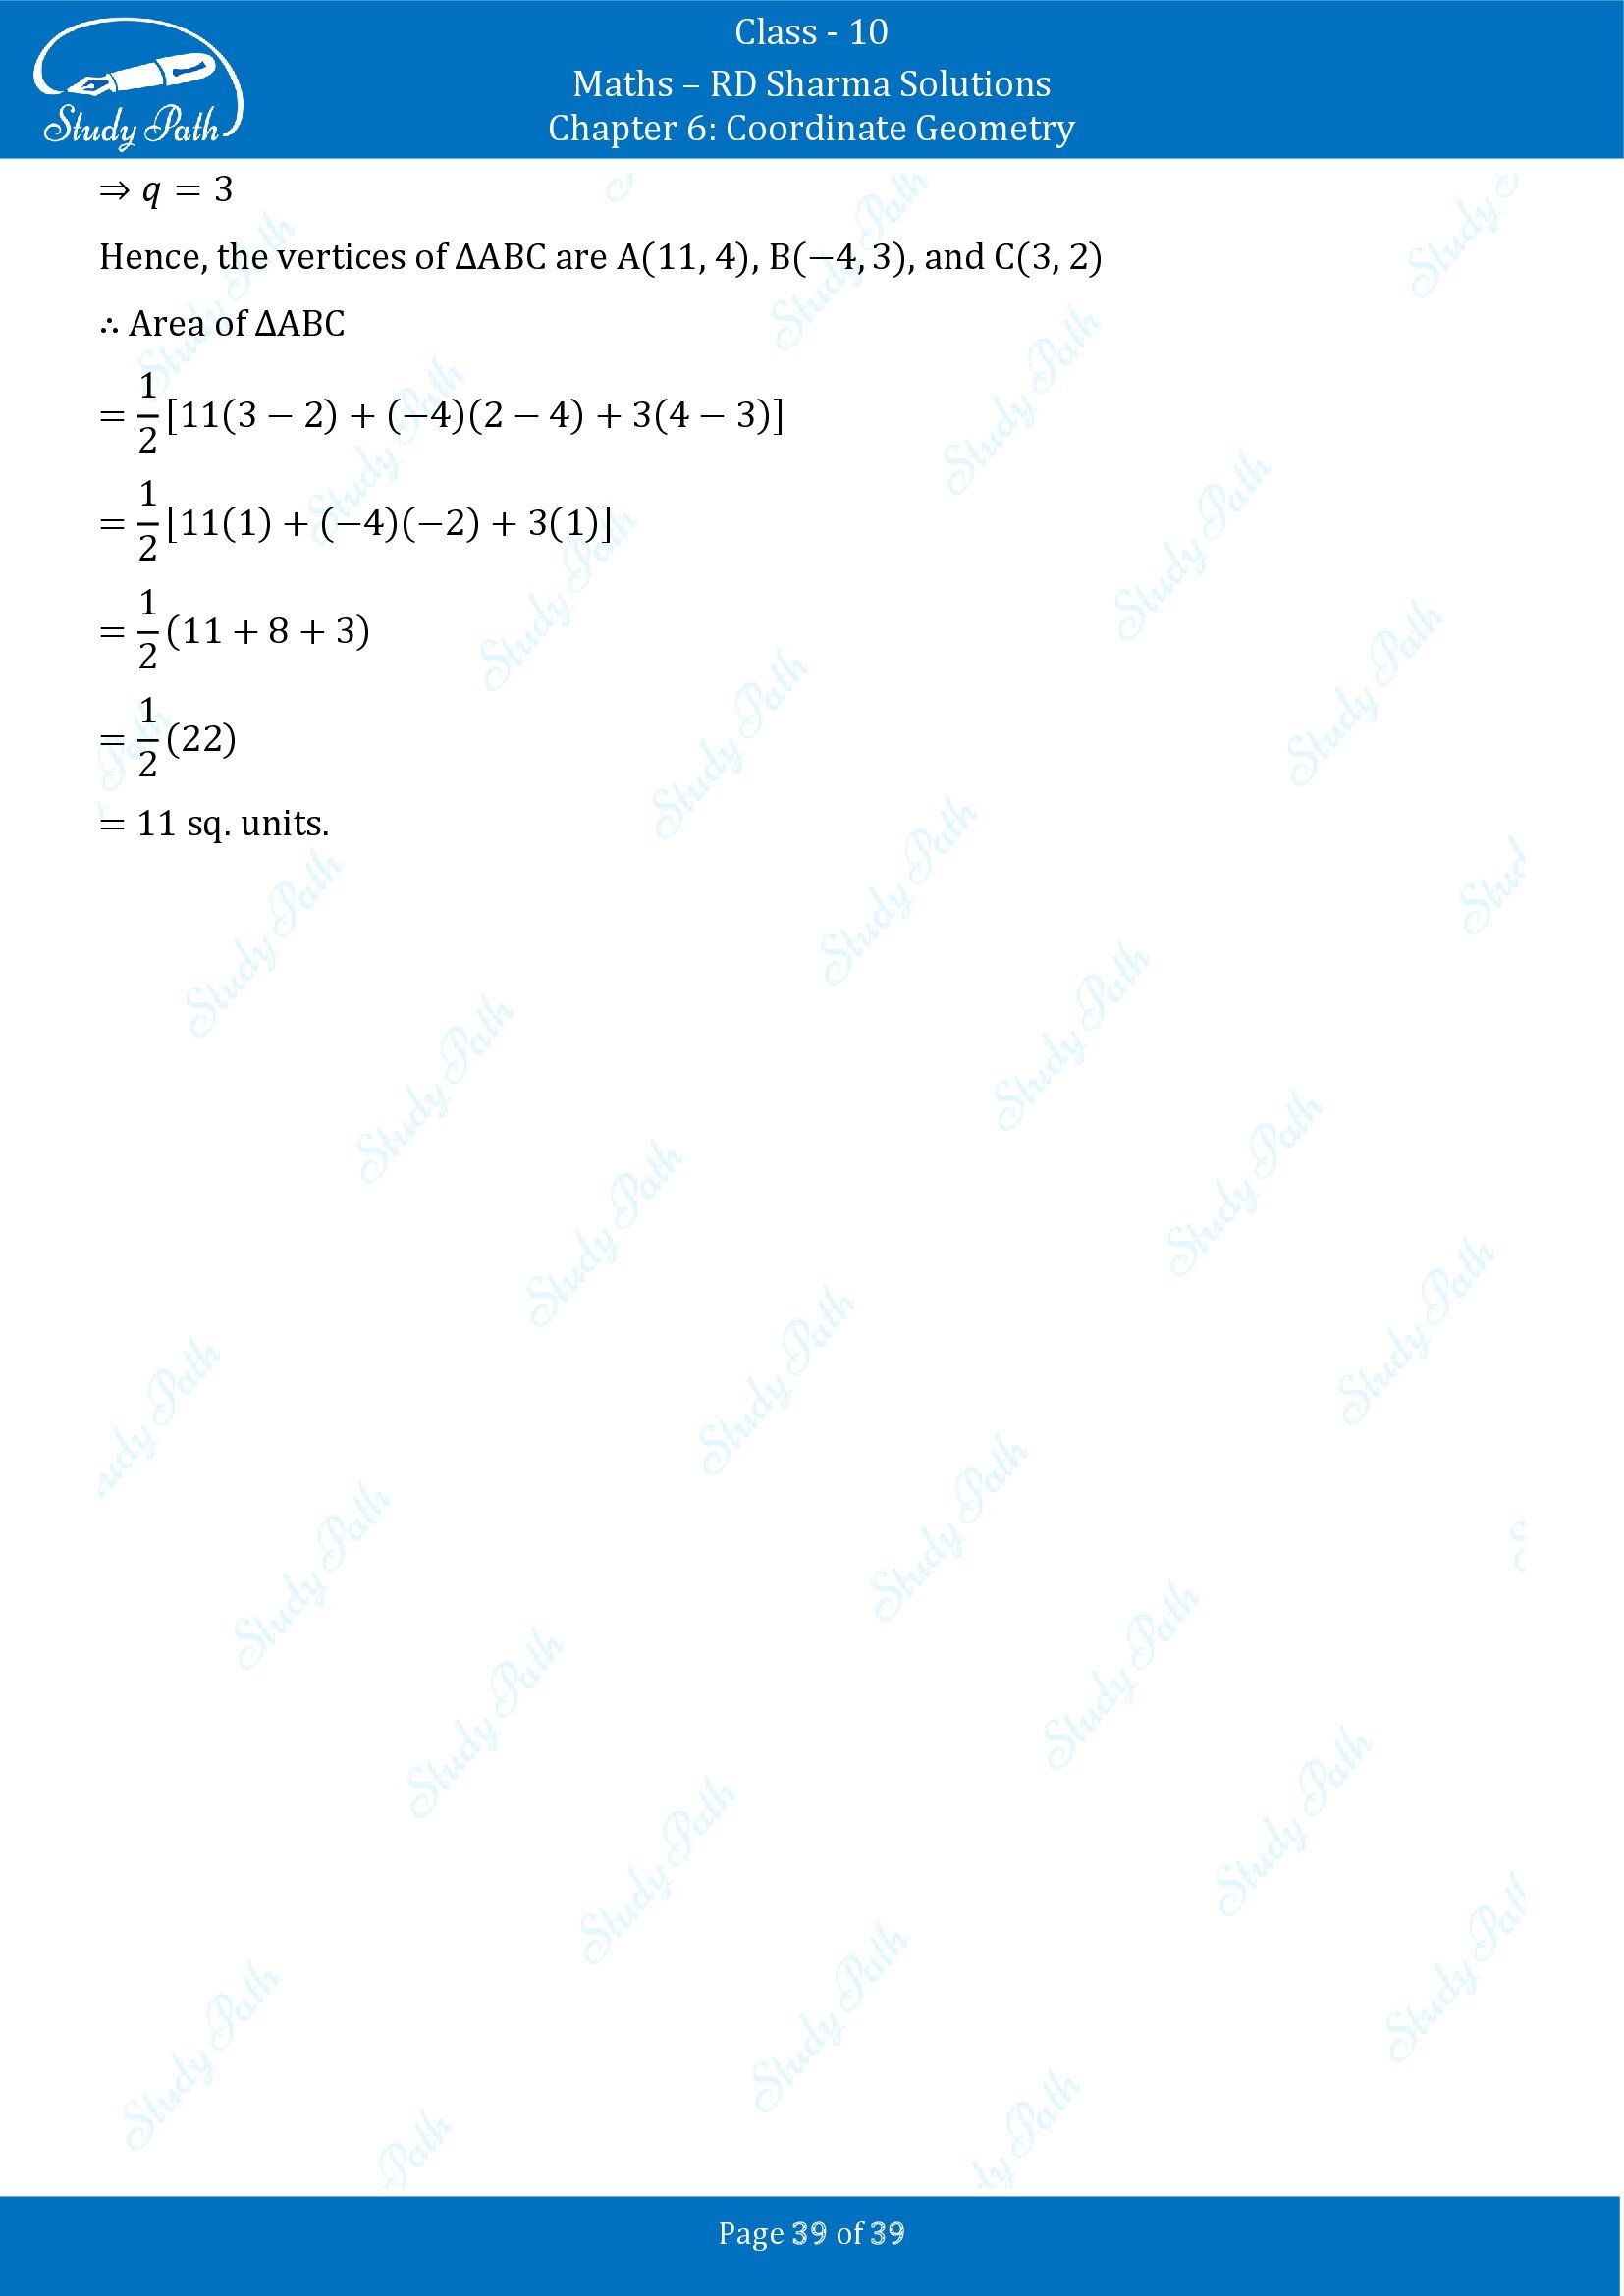 RD Sharma Solutions Class 10 Chapter 6 Coordinate Geometry Exercise 6.5 0039